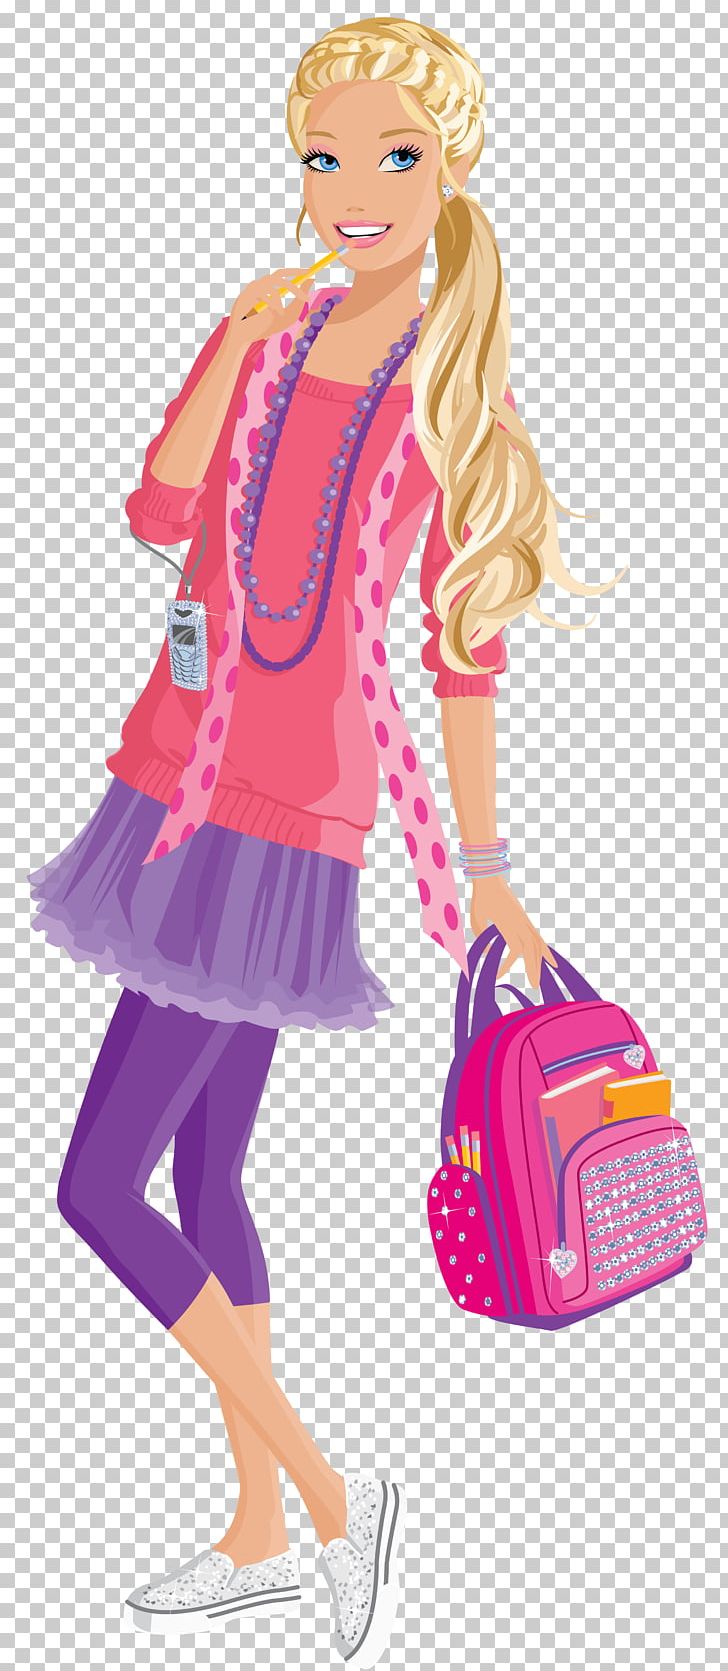 Barbie: The Princess & The Popstar Doll PNG, Clipart, Art, Barbie, Barbie Girl, Barbie Princess Charm School, Barbie The Princess The Popstar Free PNG Download